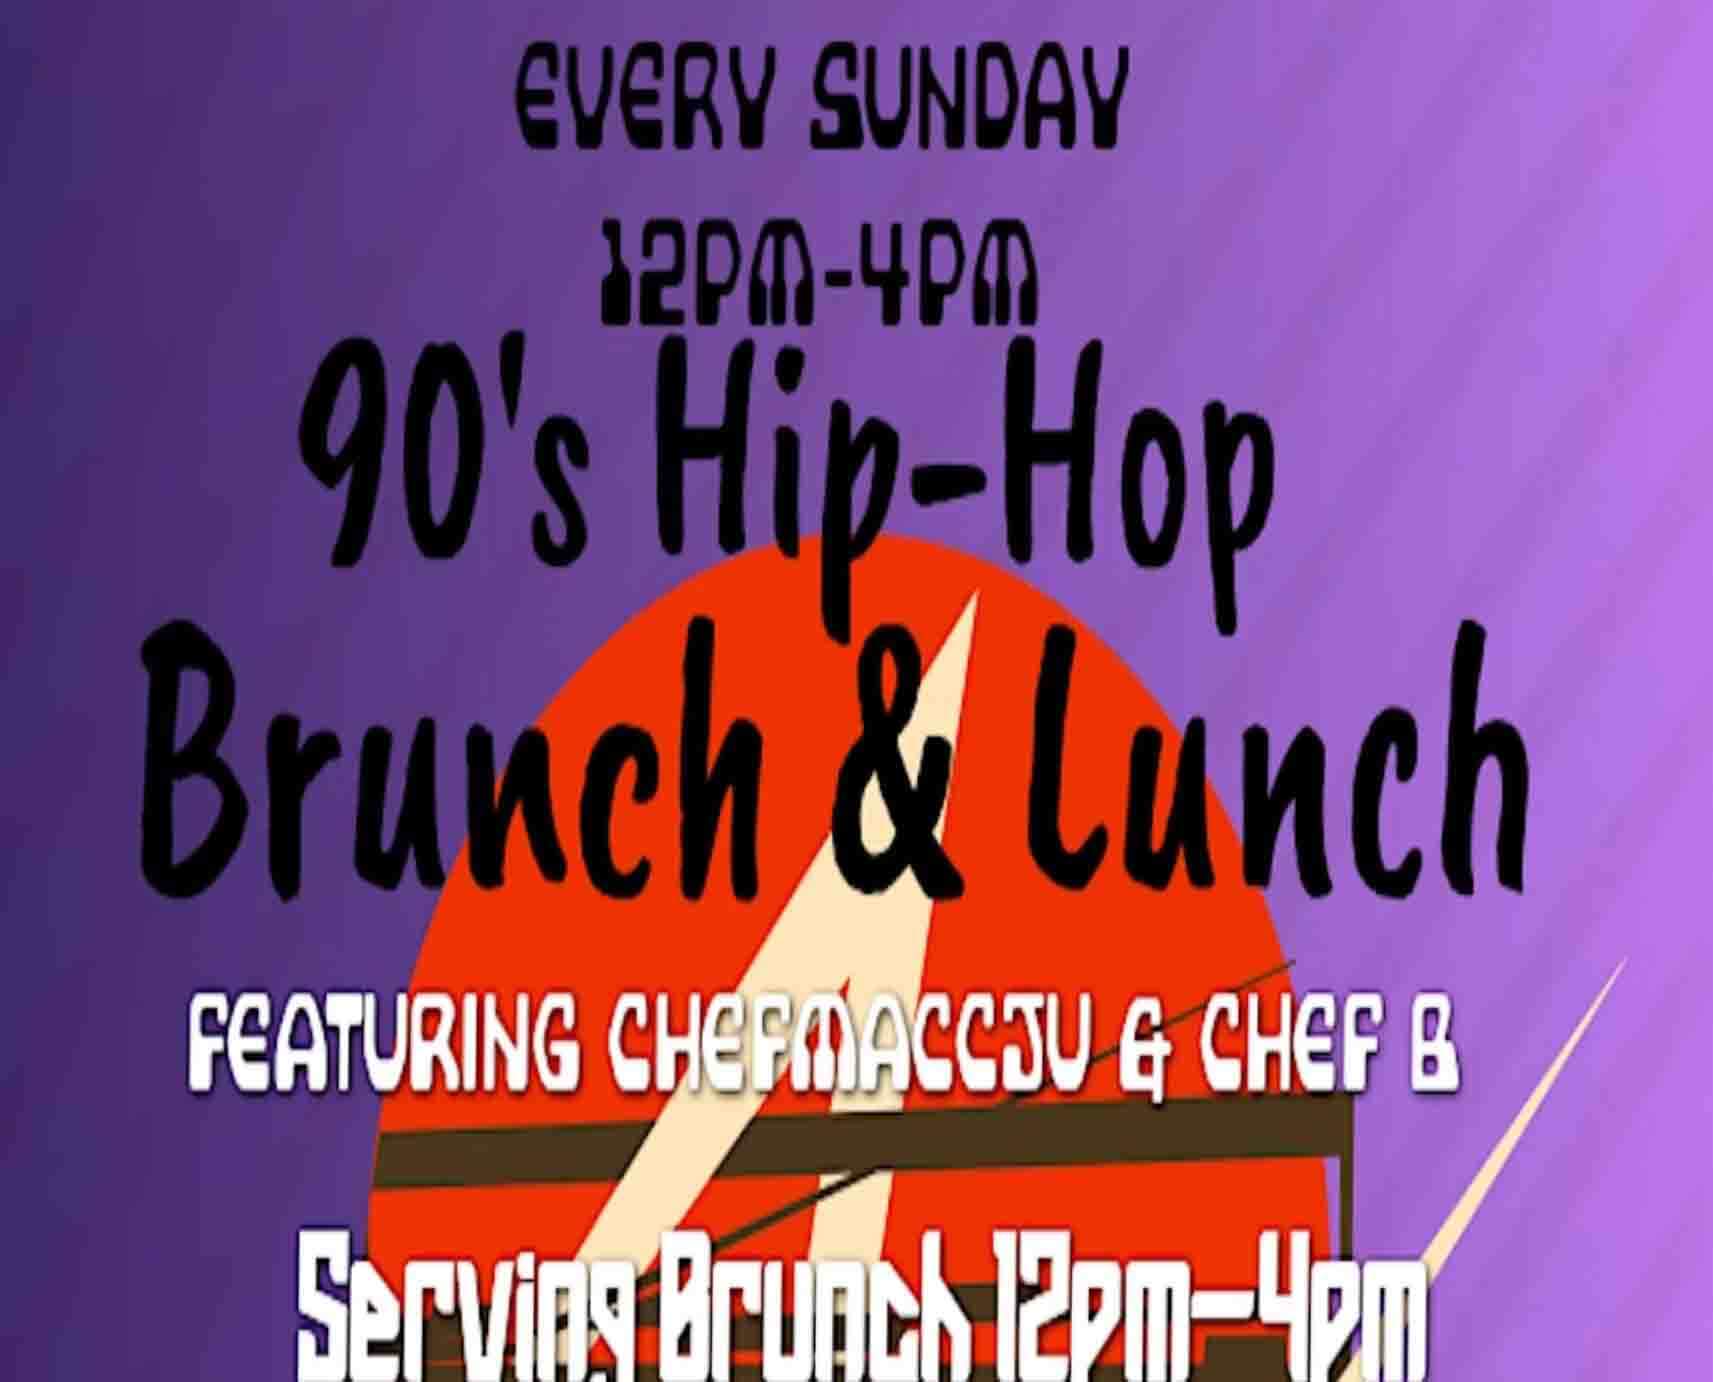 90's Hip Hop Brunch and Lunch